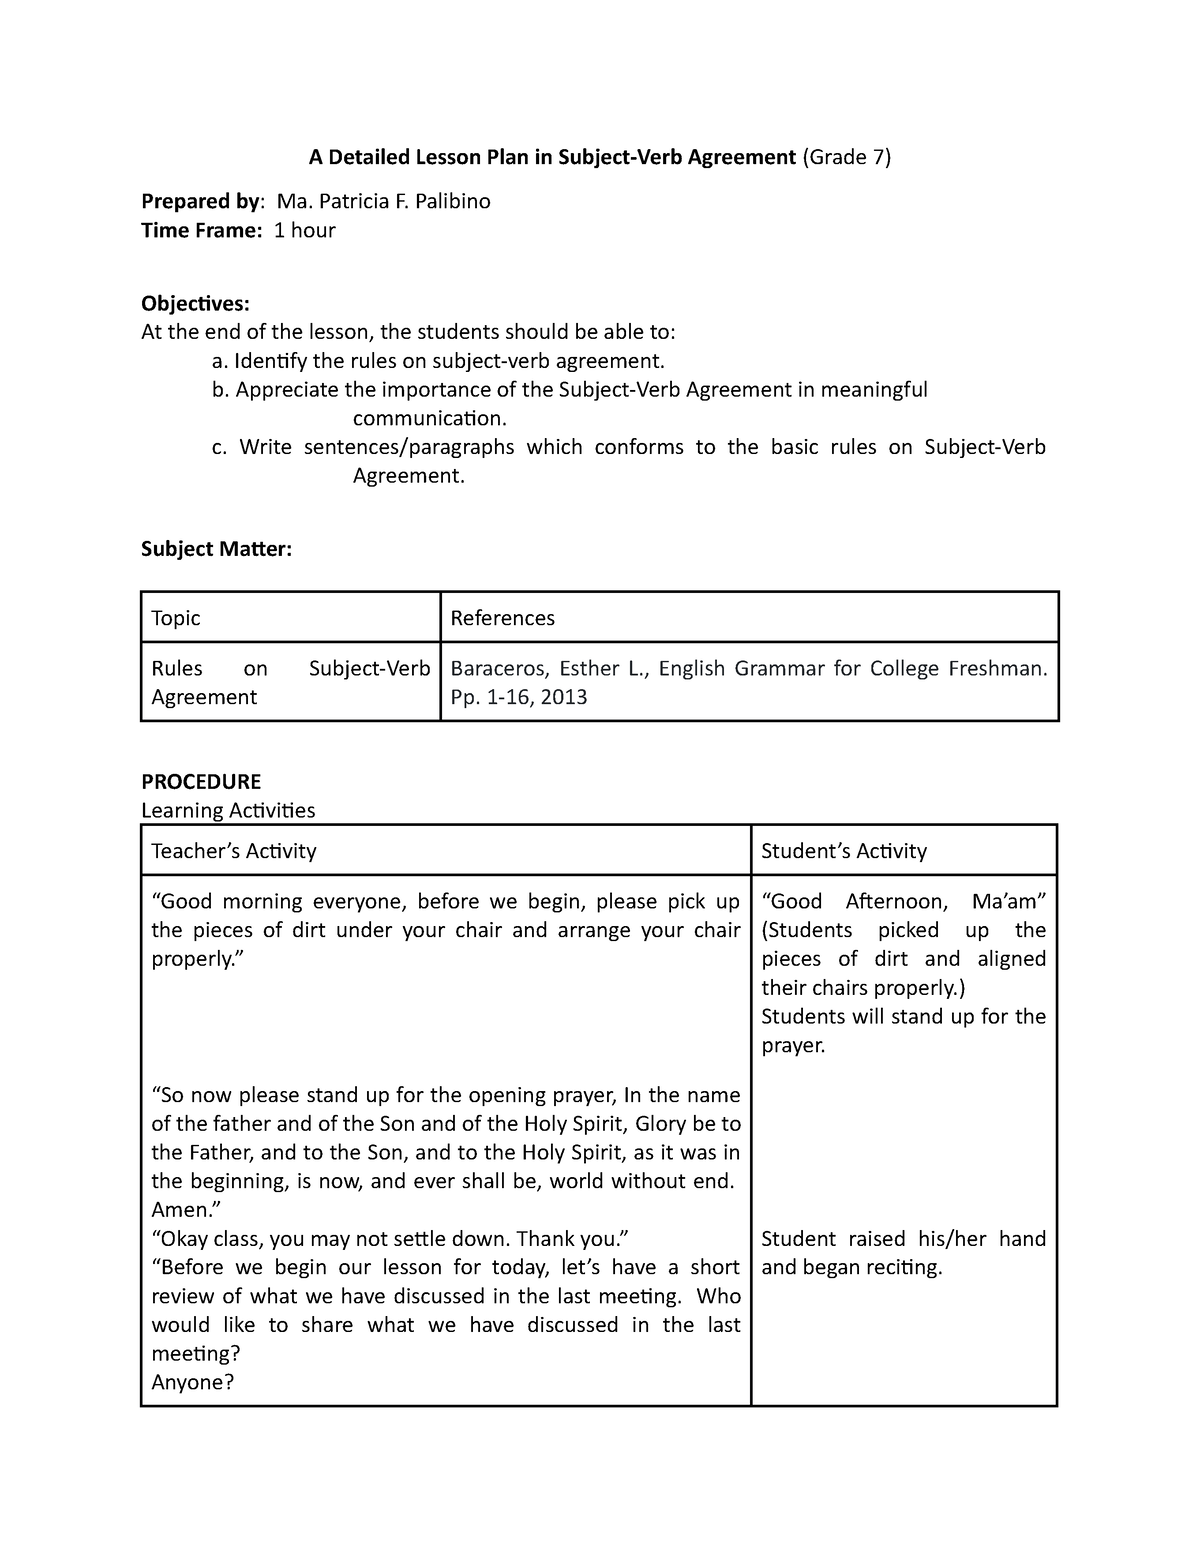 detailed-lesson-plan-for-grade-7-for-subject-verb-agreement-a